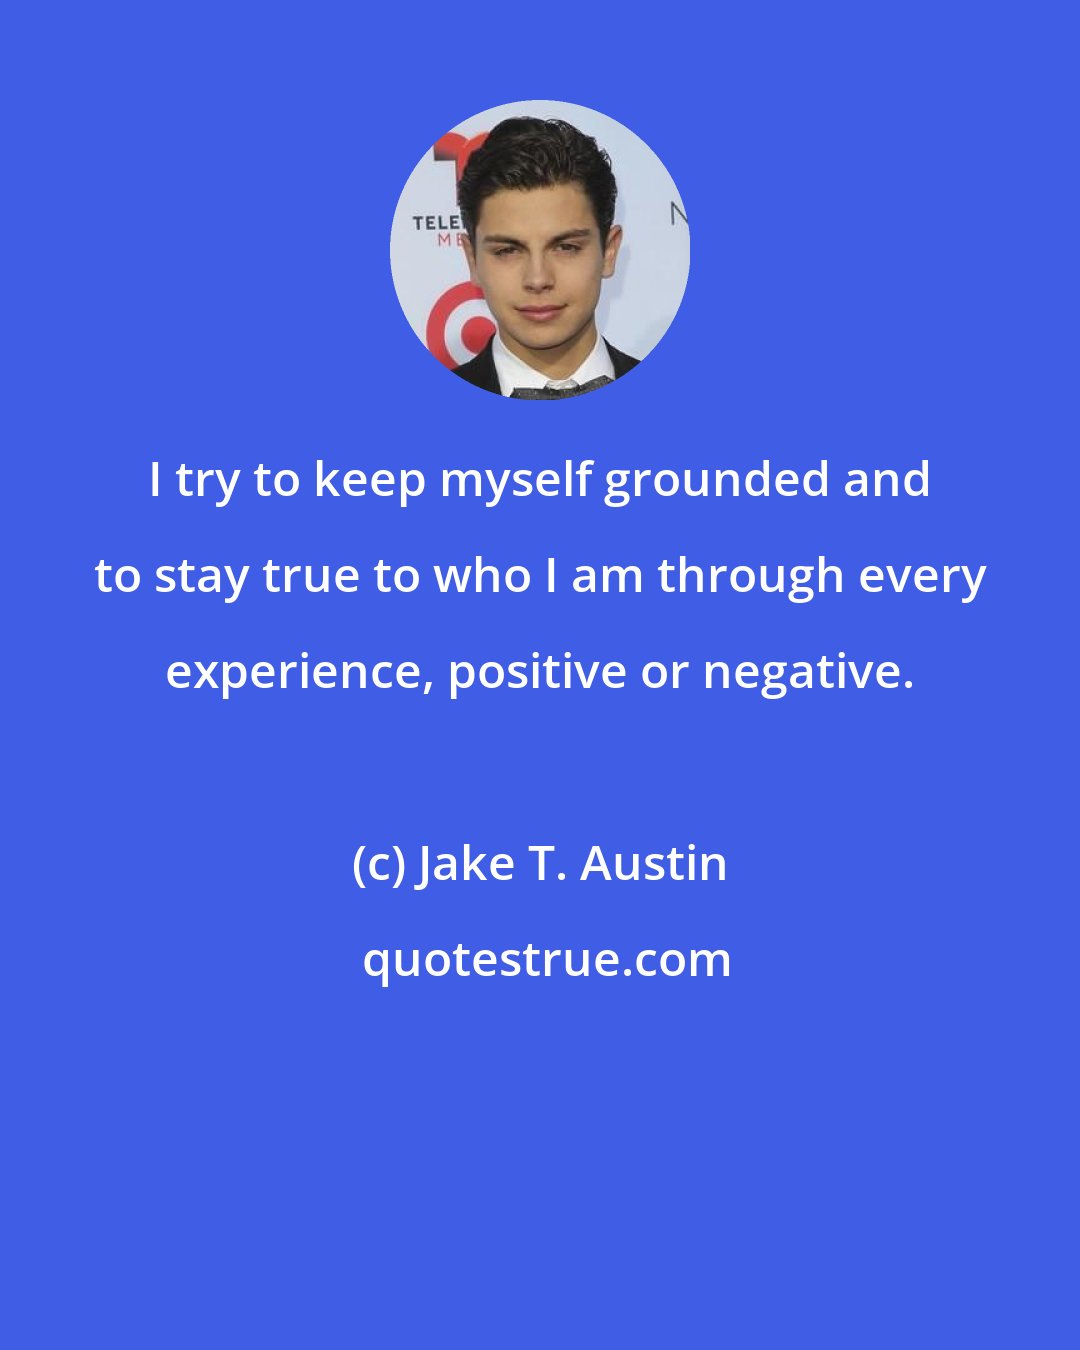 Jake T. Austin: I try to keep myself grounded and to stay true to who I am through every experience, positive or negative.